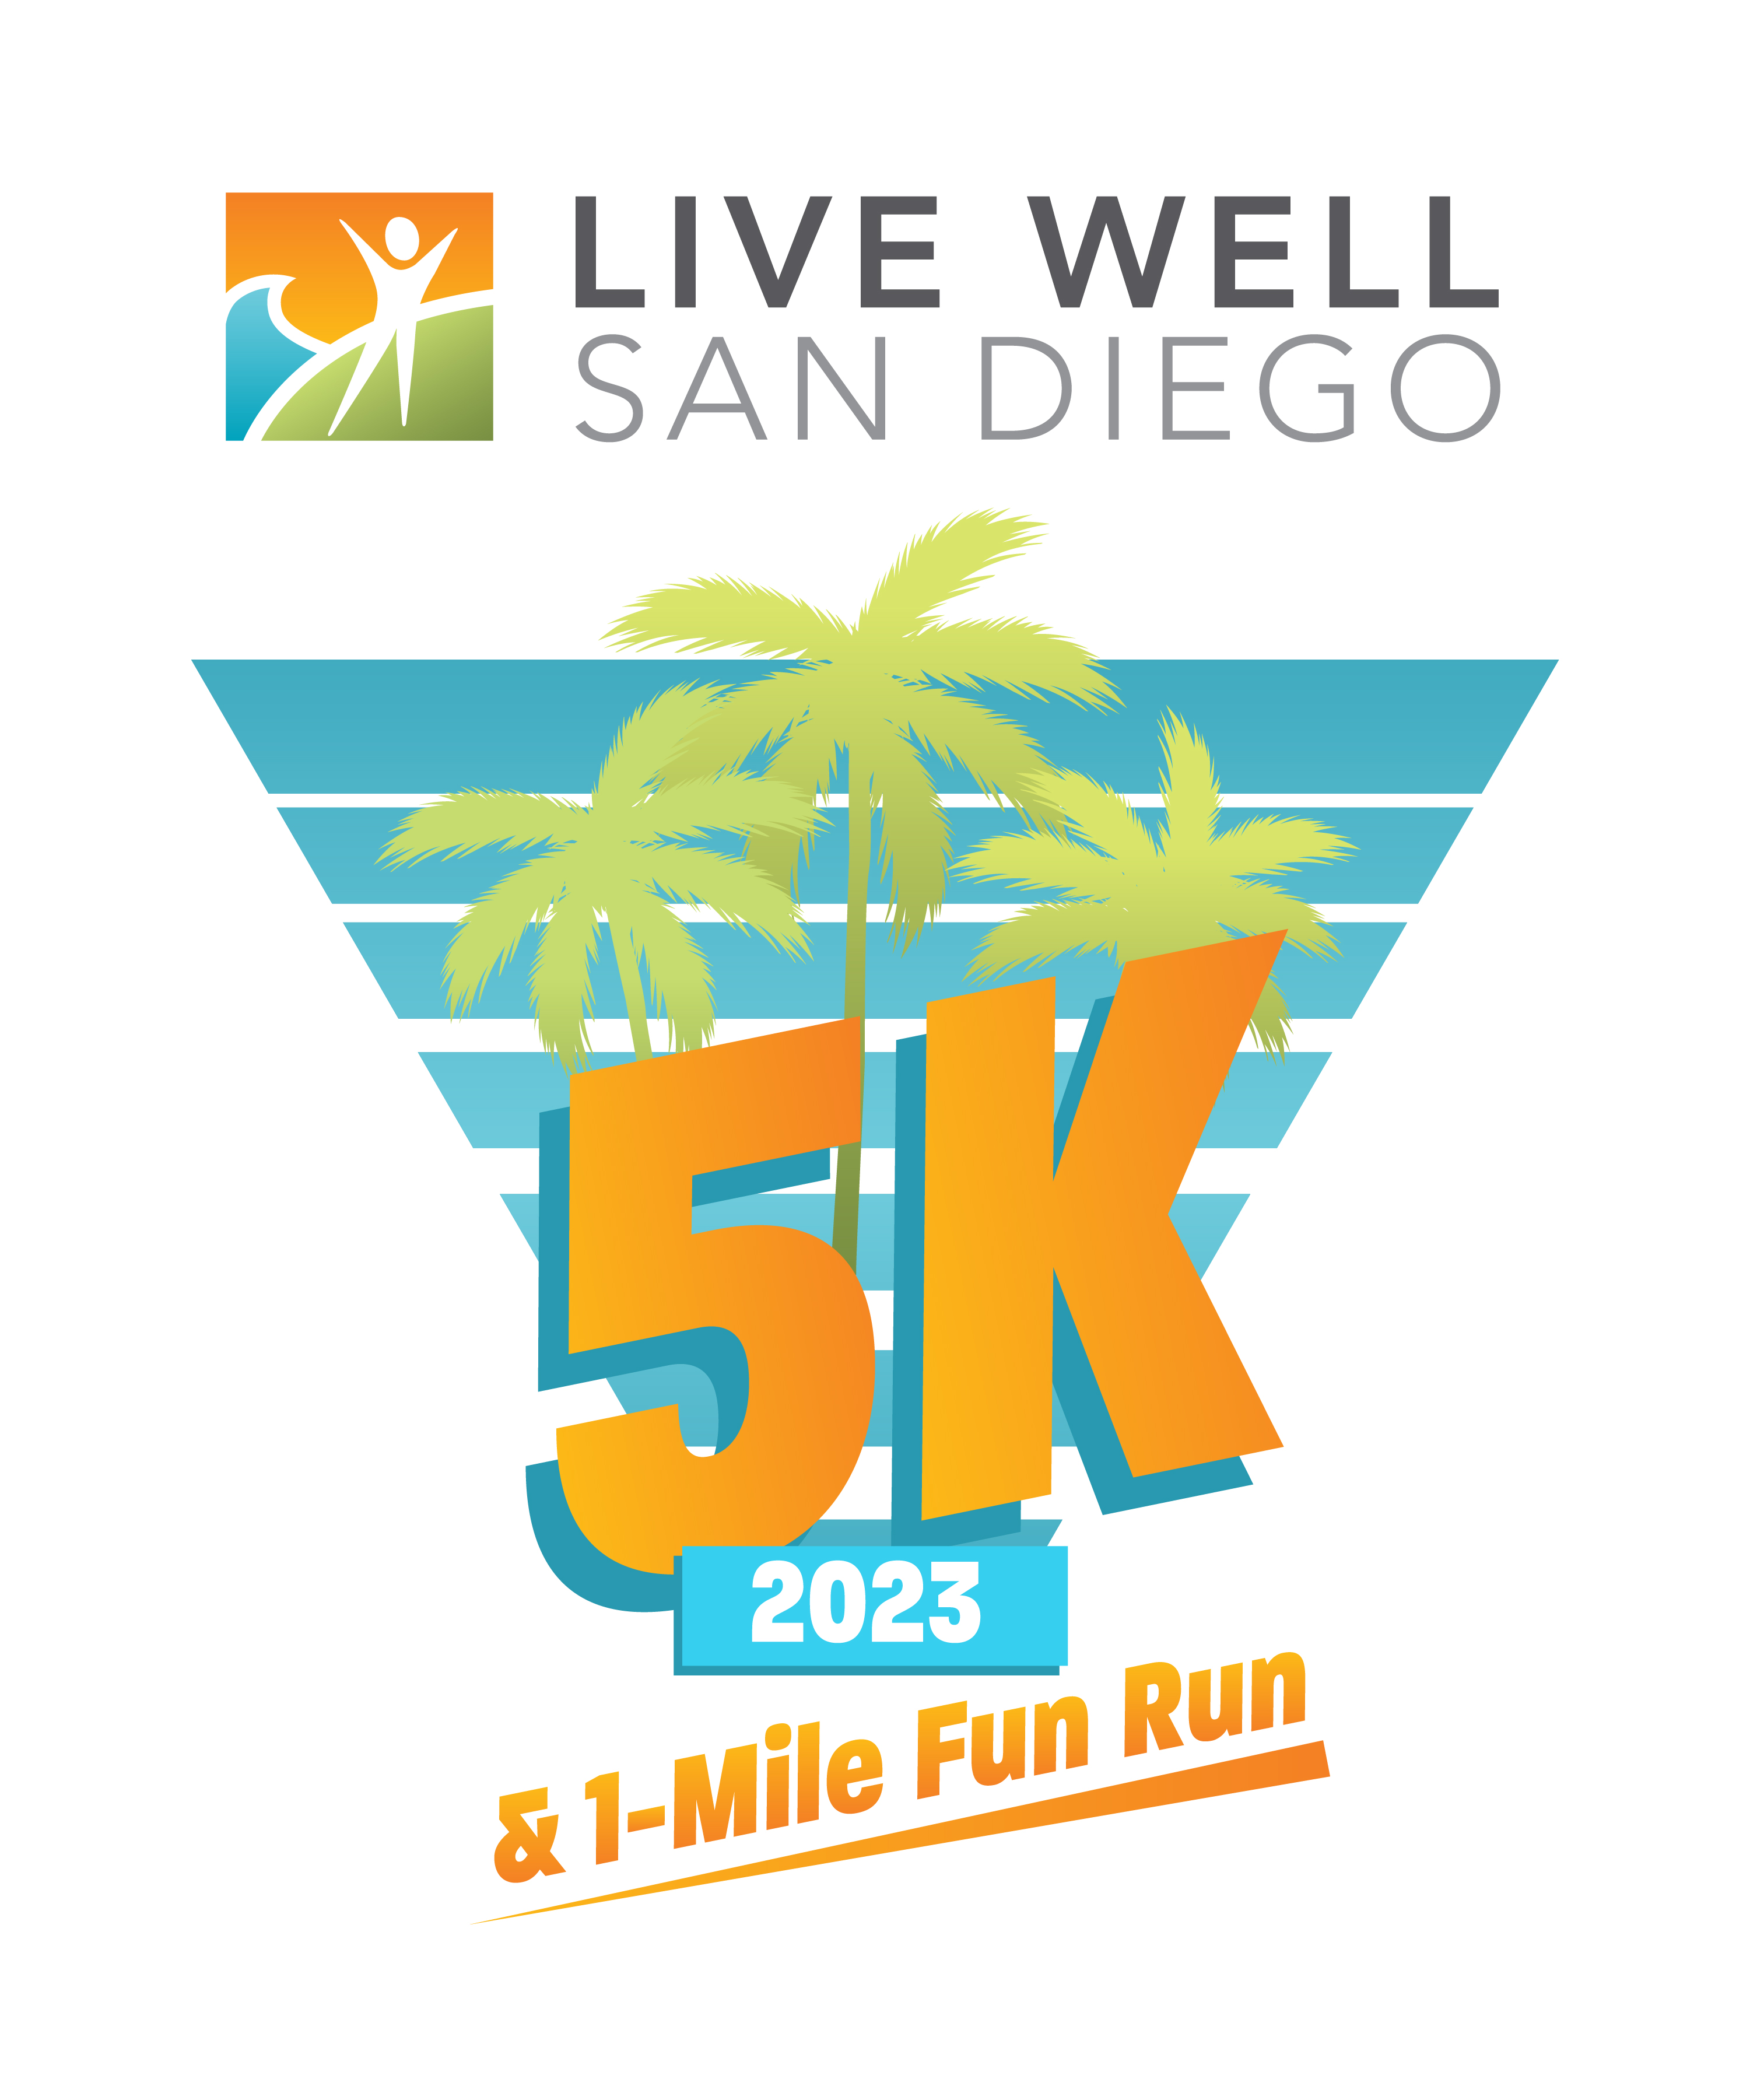 Sign Up To Volunteer 211 San Diego Live Well San Diego 5K